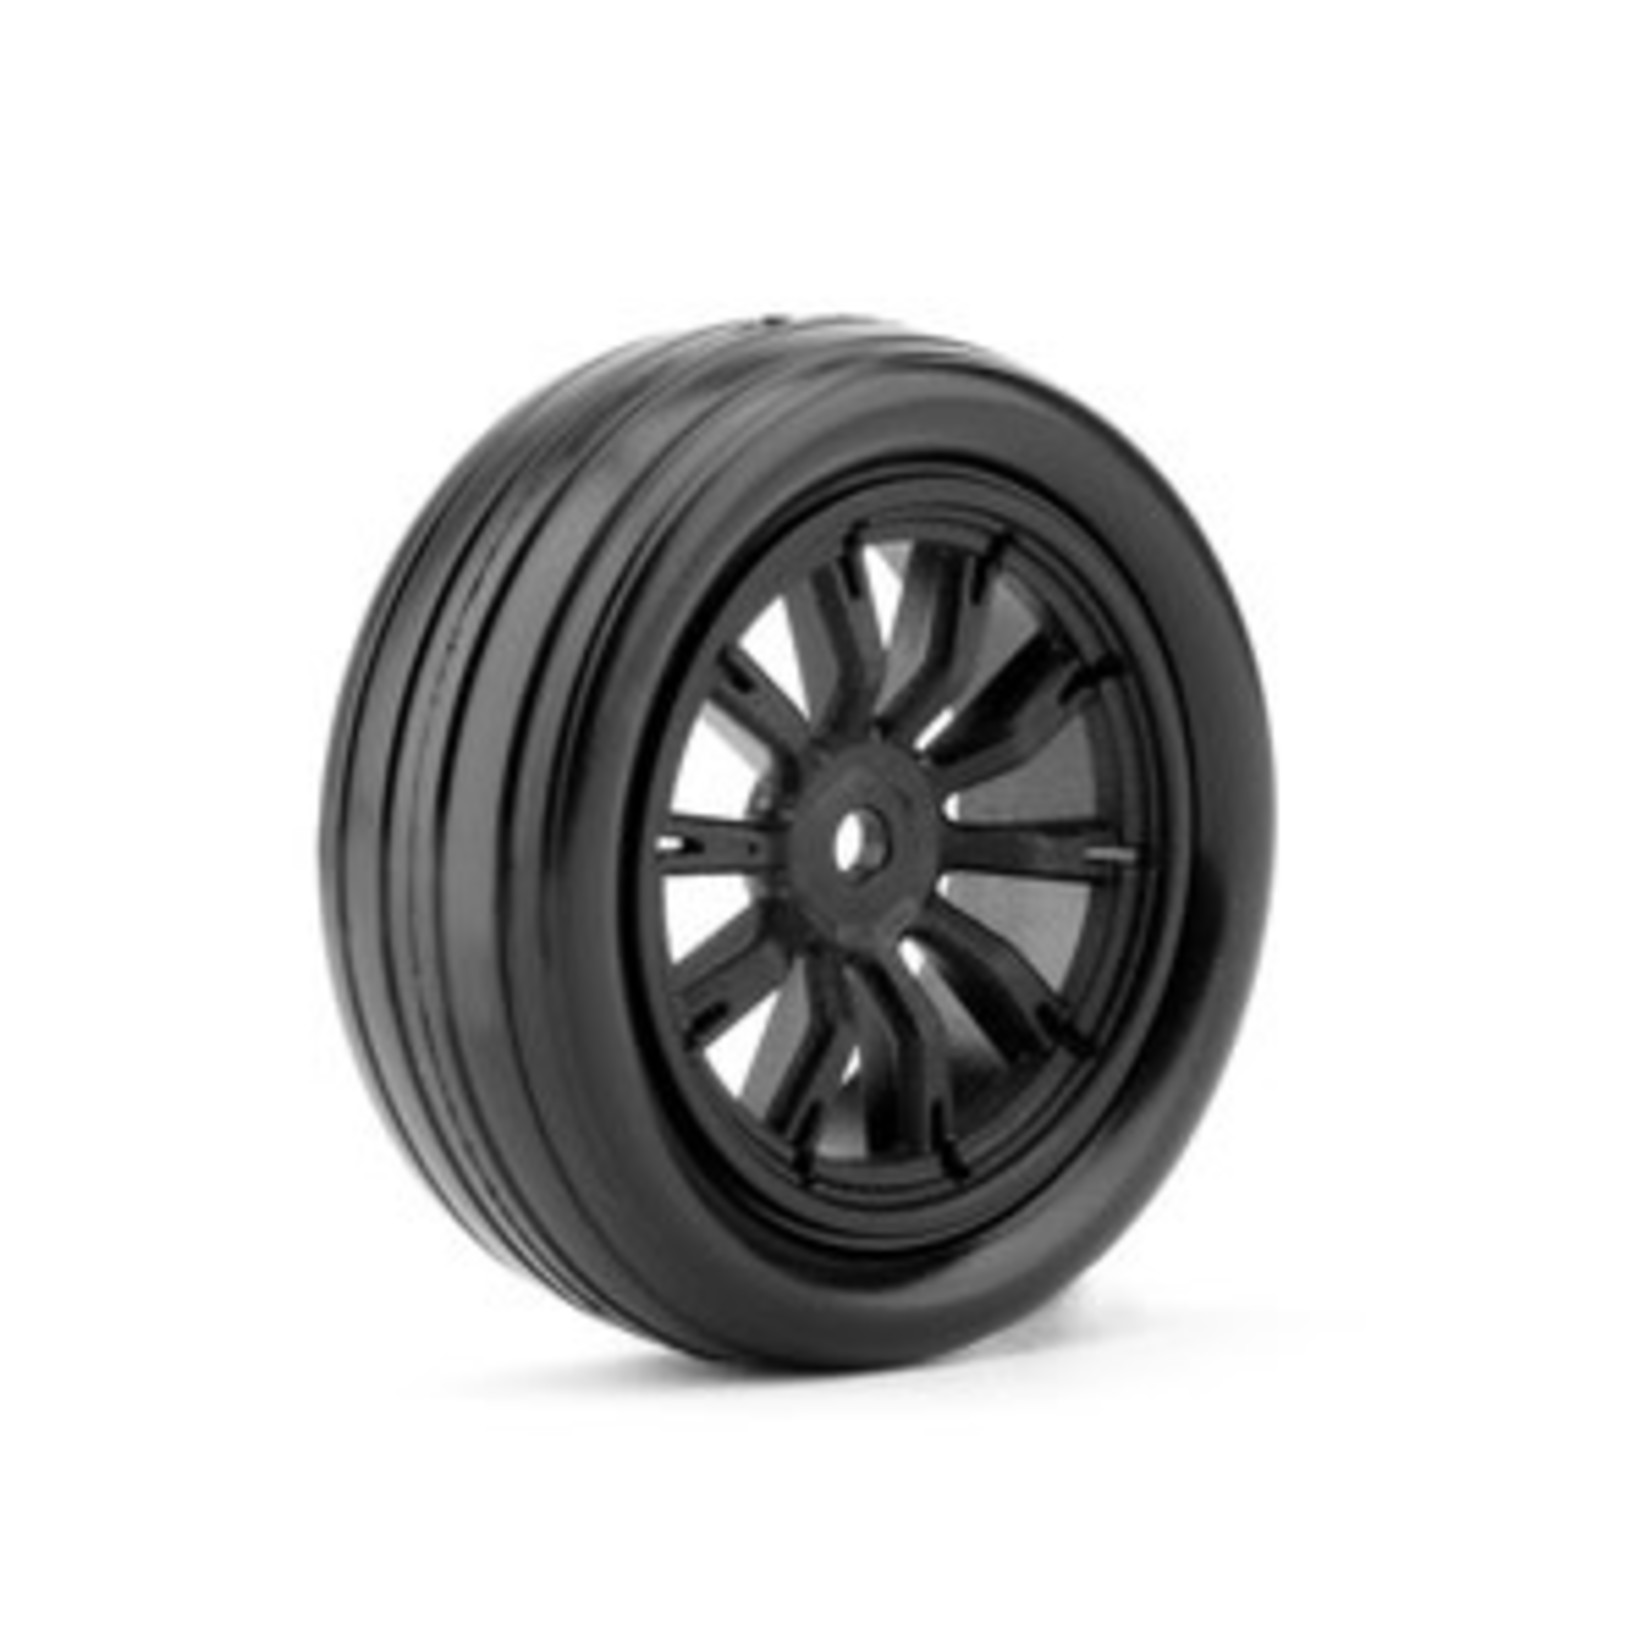 JETKO JKO2901CBSSG  1/10 DR Booster Front Tires, Mounted on Black Claw Rims, Super Soft